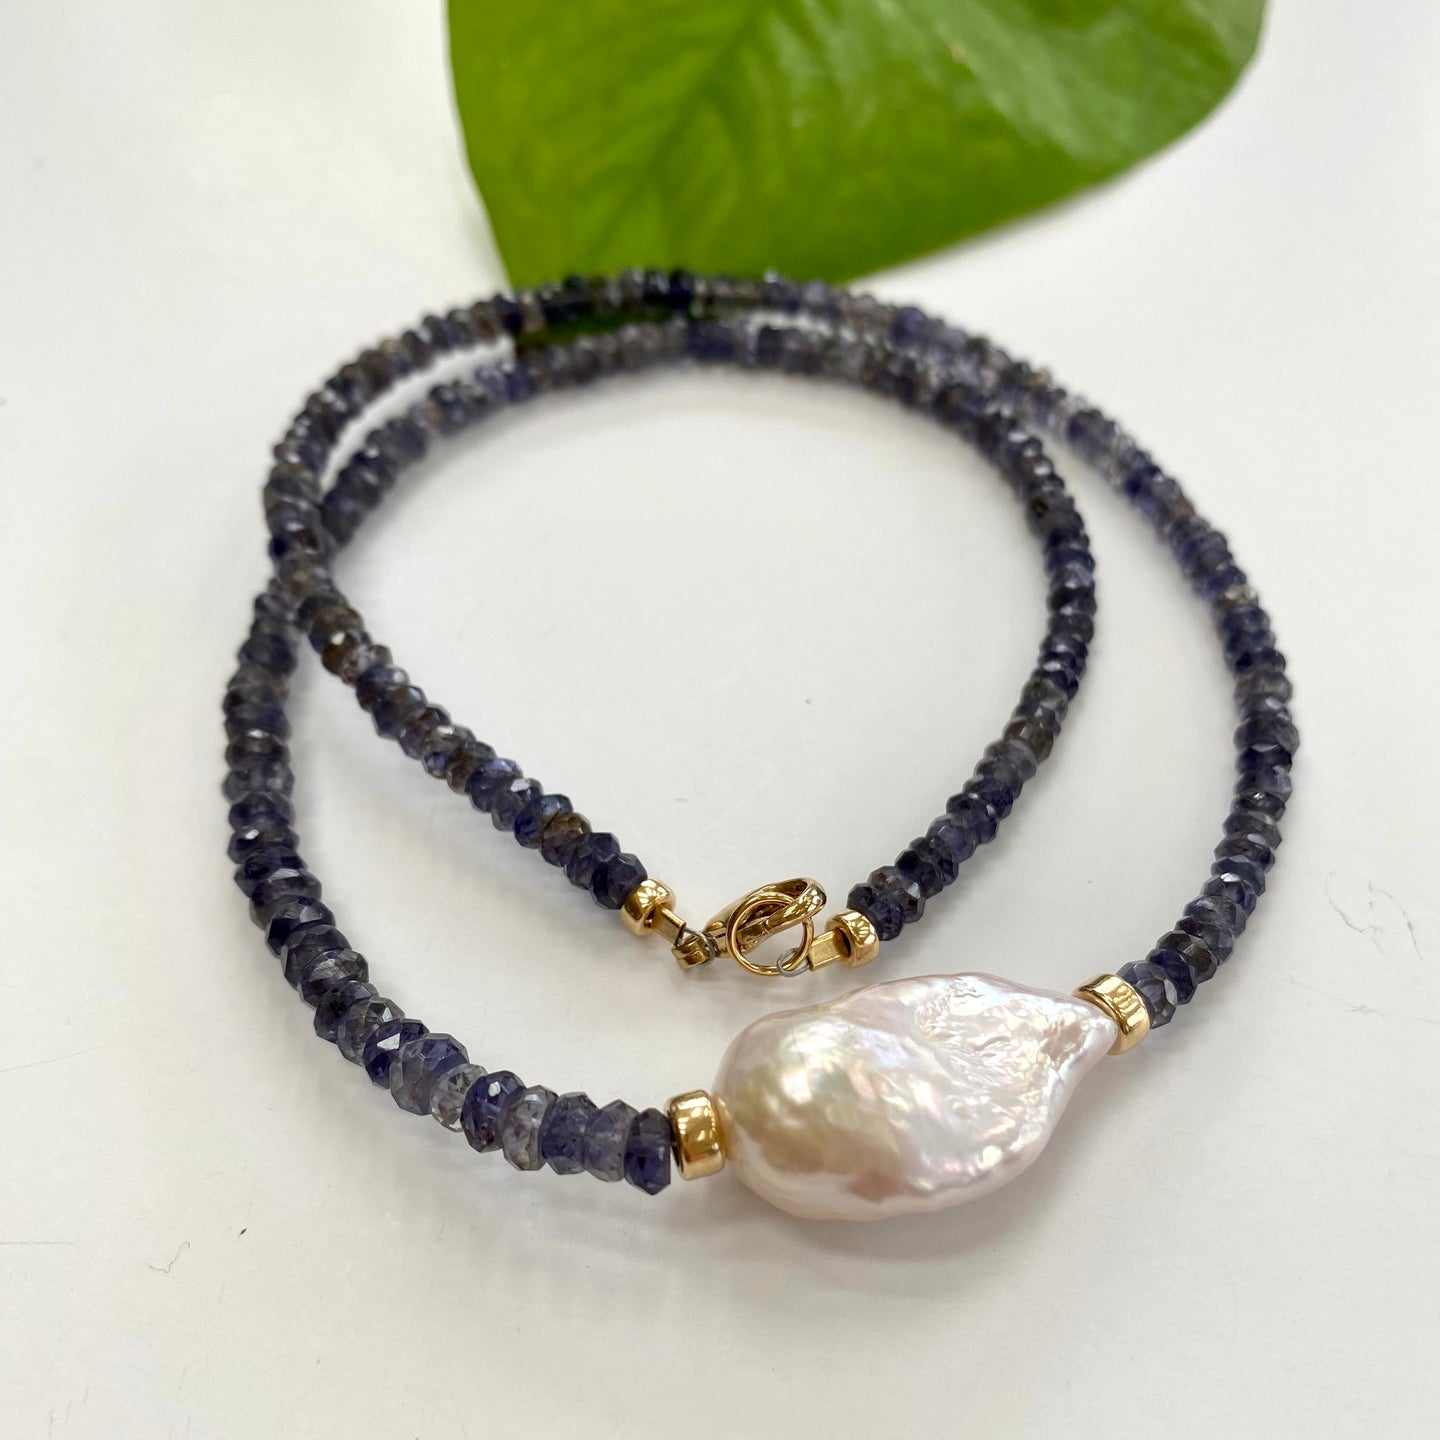 Denim Blue Iolite and Baroque Pearl Beaded Necklace, Gold Filled Details, 18